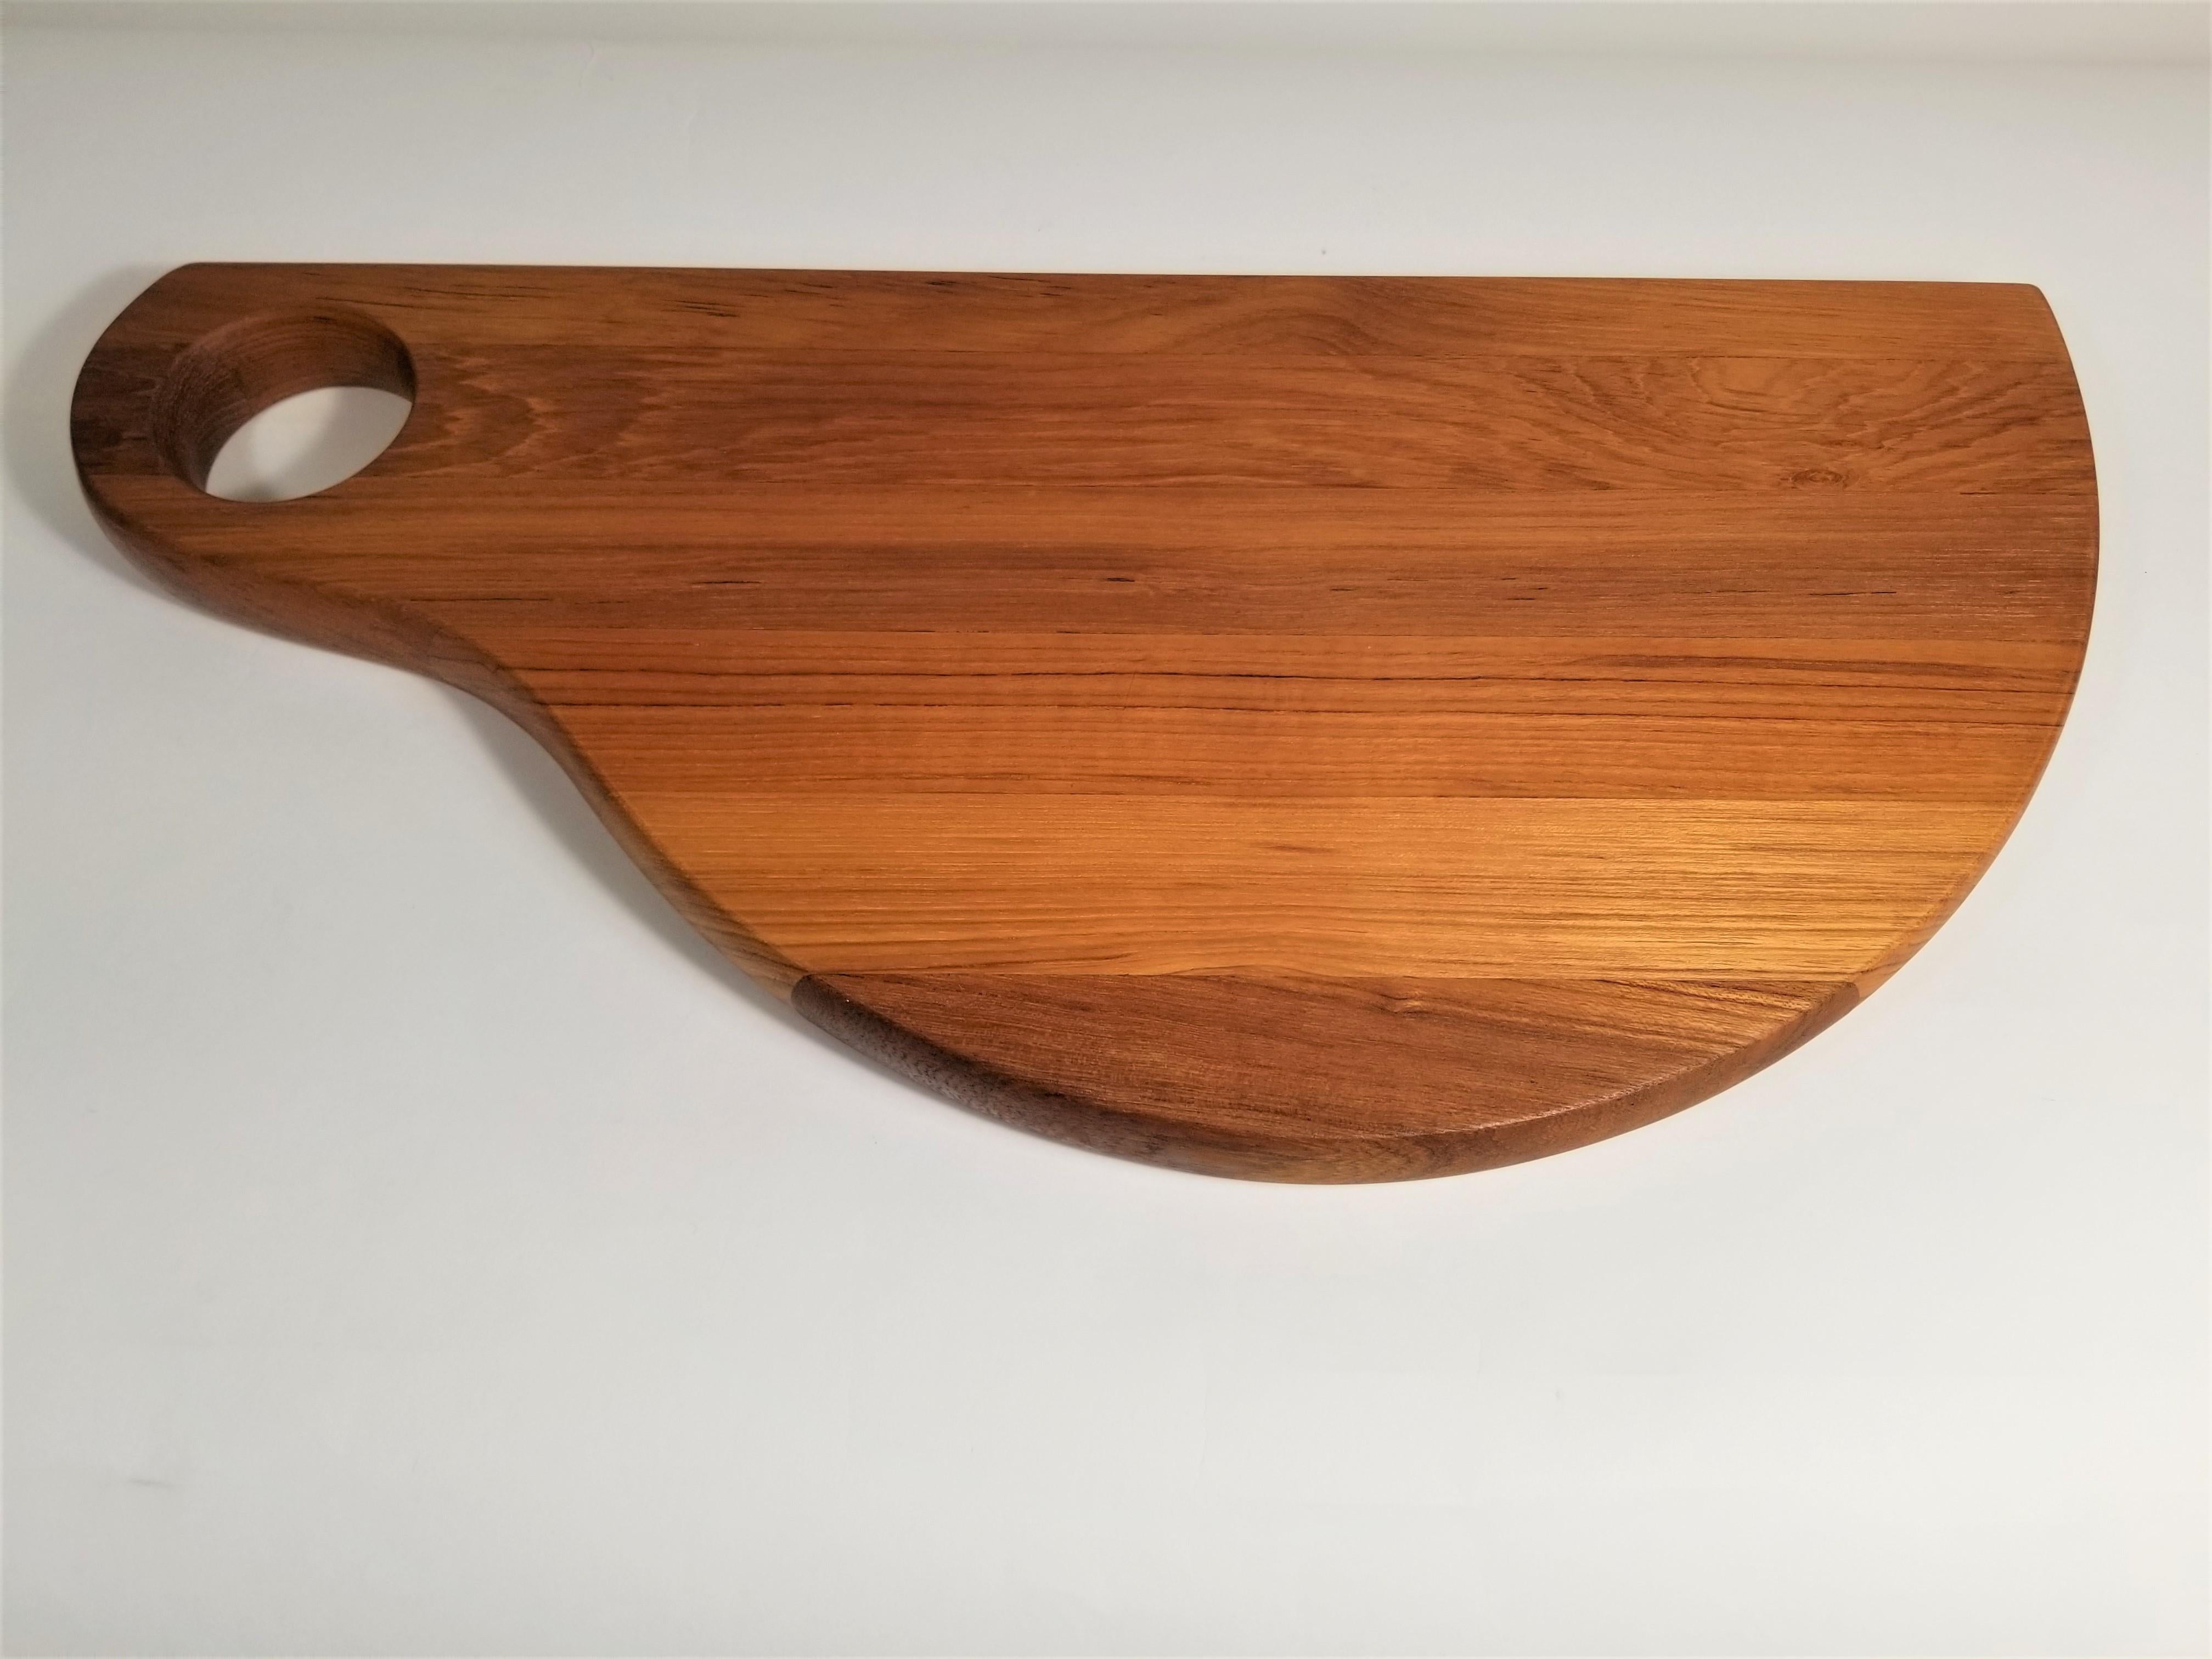 Mid Century Late 1960s-early 1970s Danish Teak Tray or cutting board perfect for Charcuterie. Unused and still with original box and plastic wrapping. 
Marked Denmark.